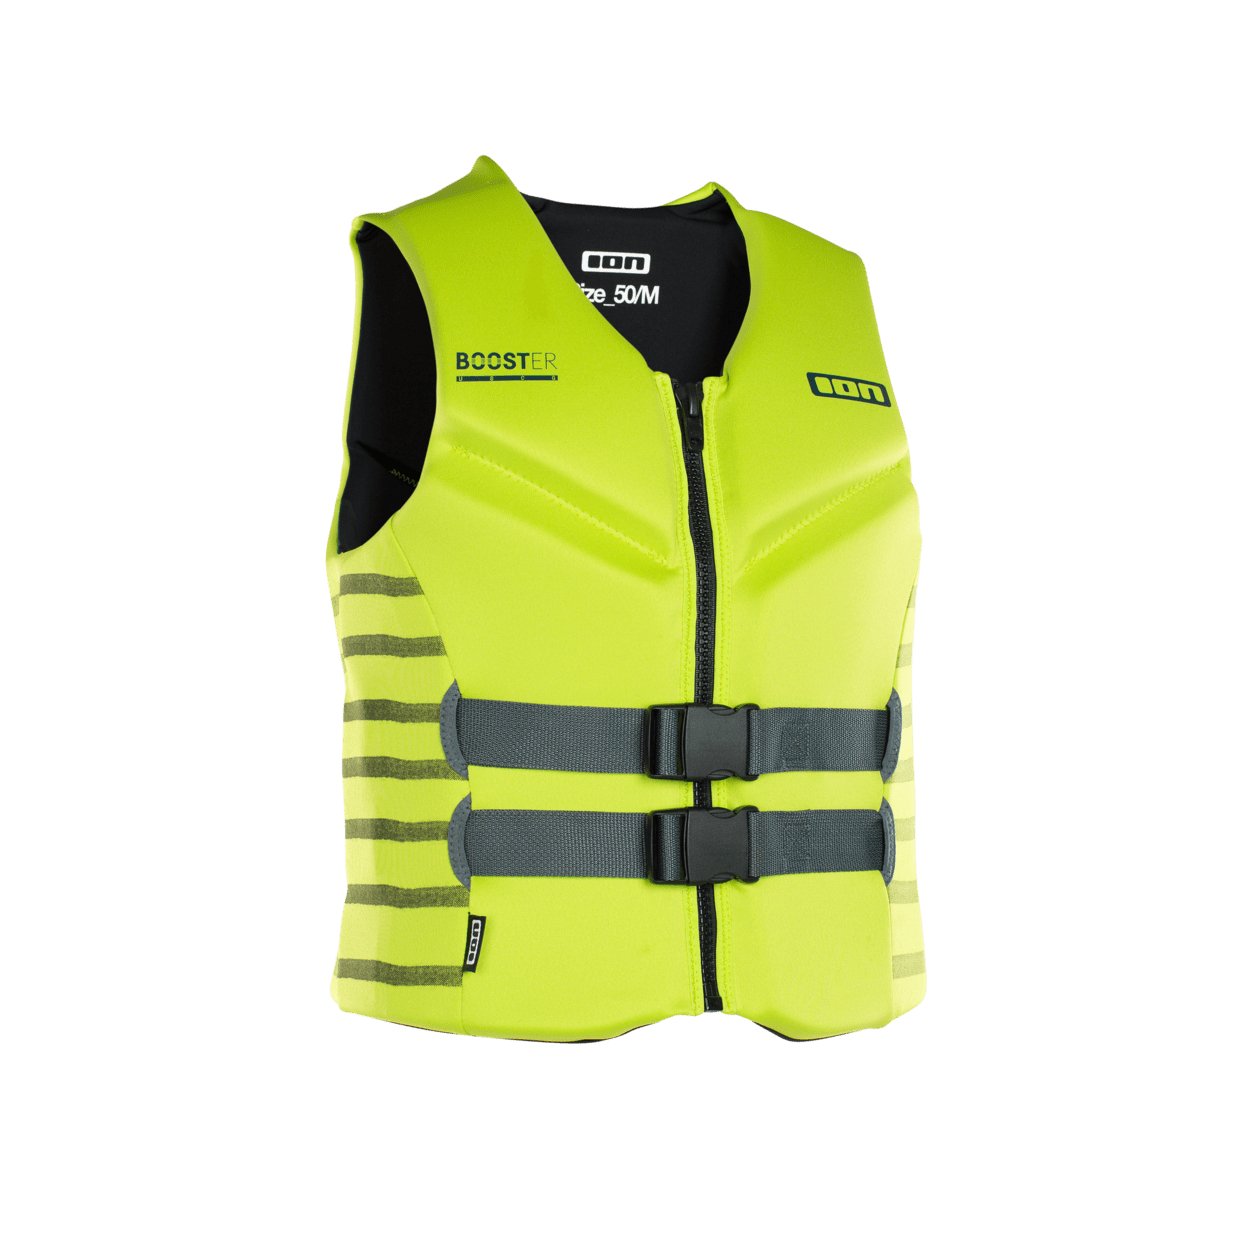 ION Booster Vest 50N Front Zip 2022 - Worthing Watersports - 9010583080406 - Protection - ION Water